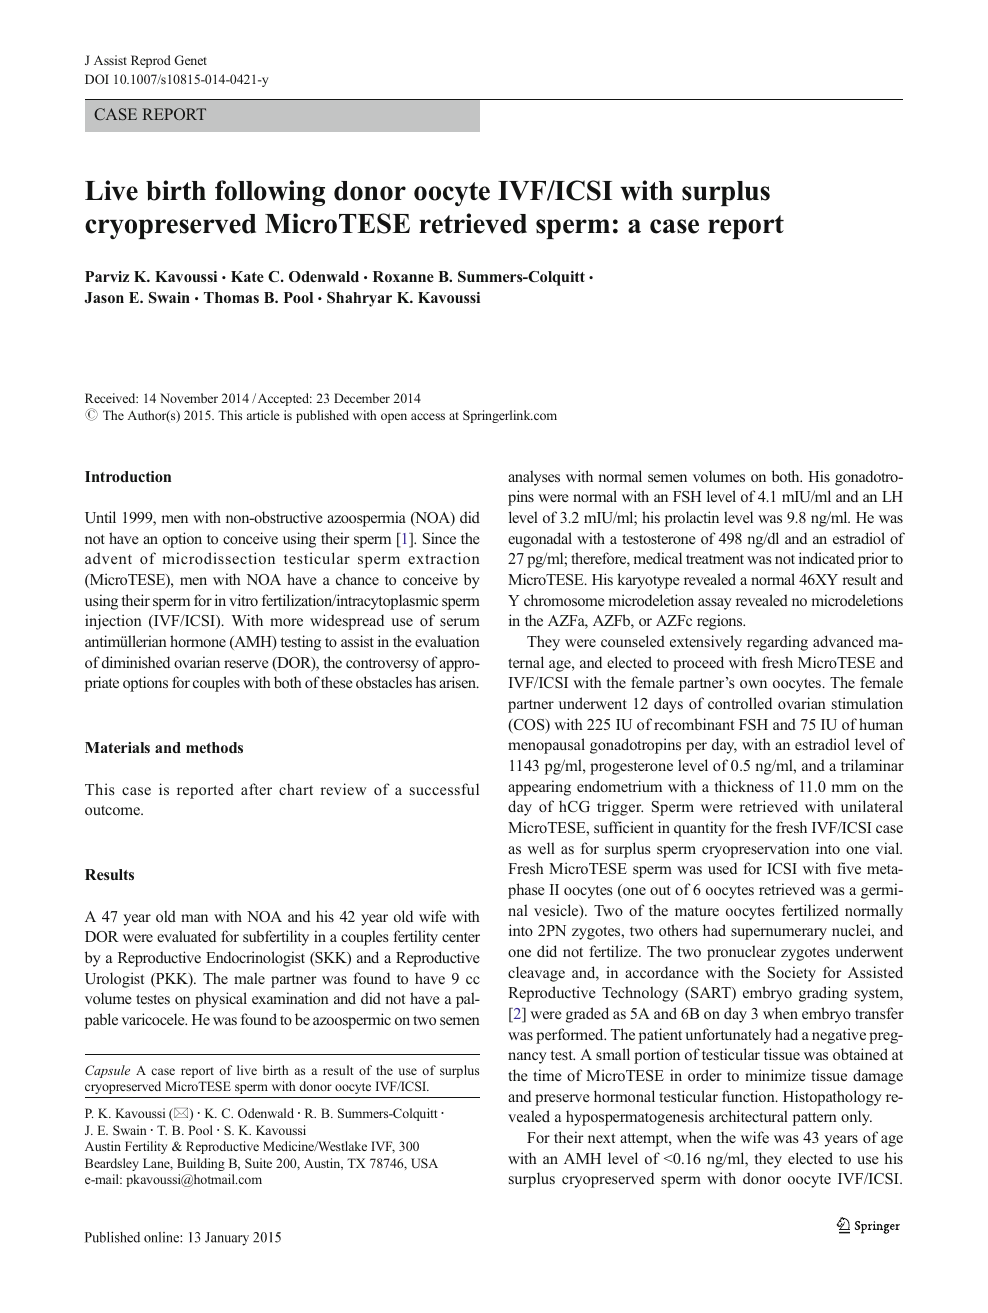 Live Birth Following Donor Oocyte Ivf Icsi With Surplus Cryopreserved Microtese Retrieved Sperm A Case Report Topic Of Research Paper In Clinical Medicine Download Scholarly Article Pdf And Read For Free On